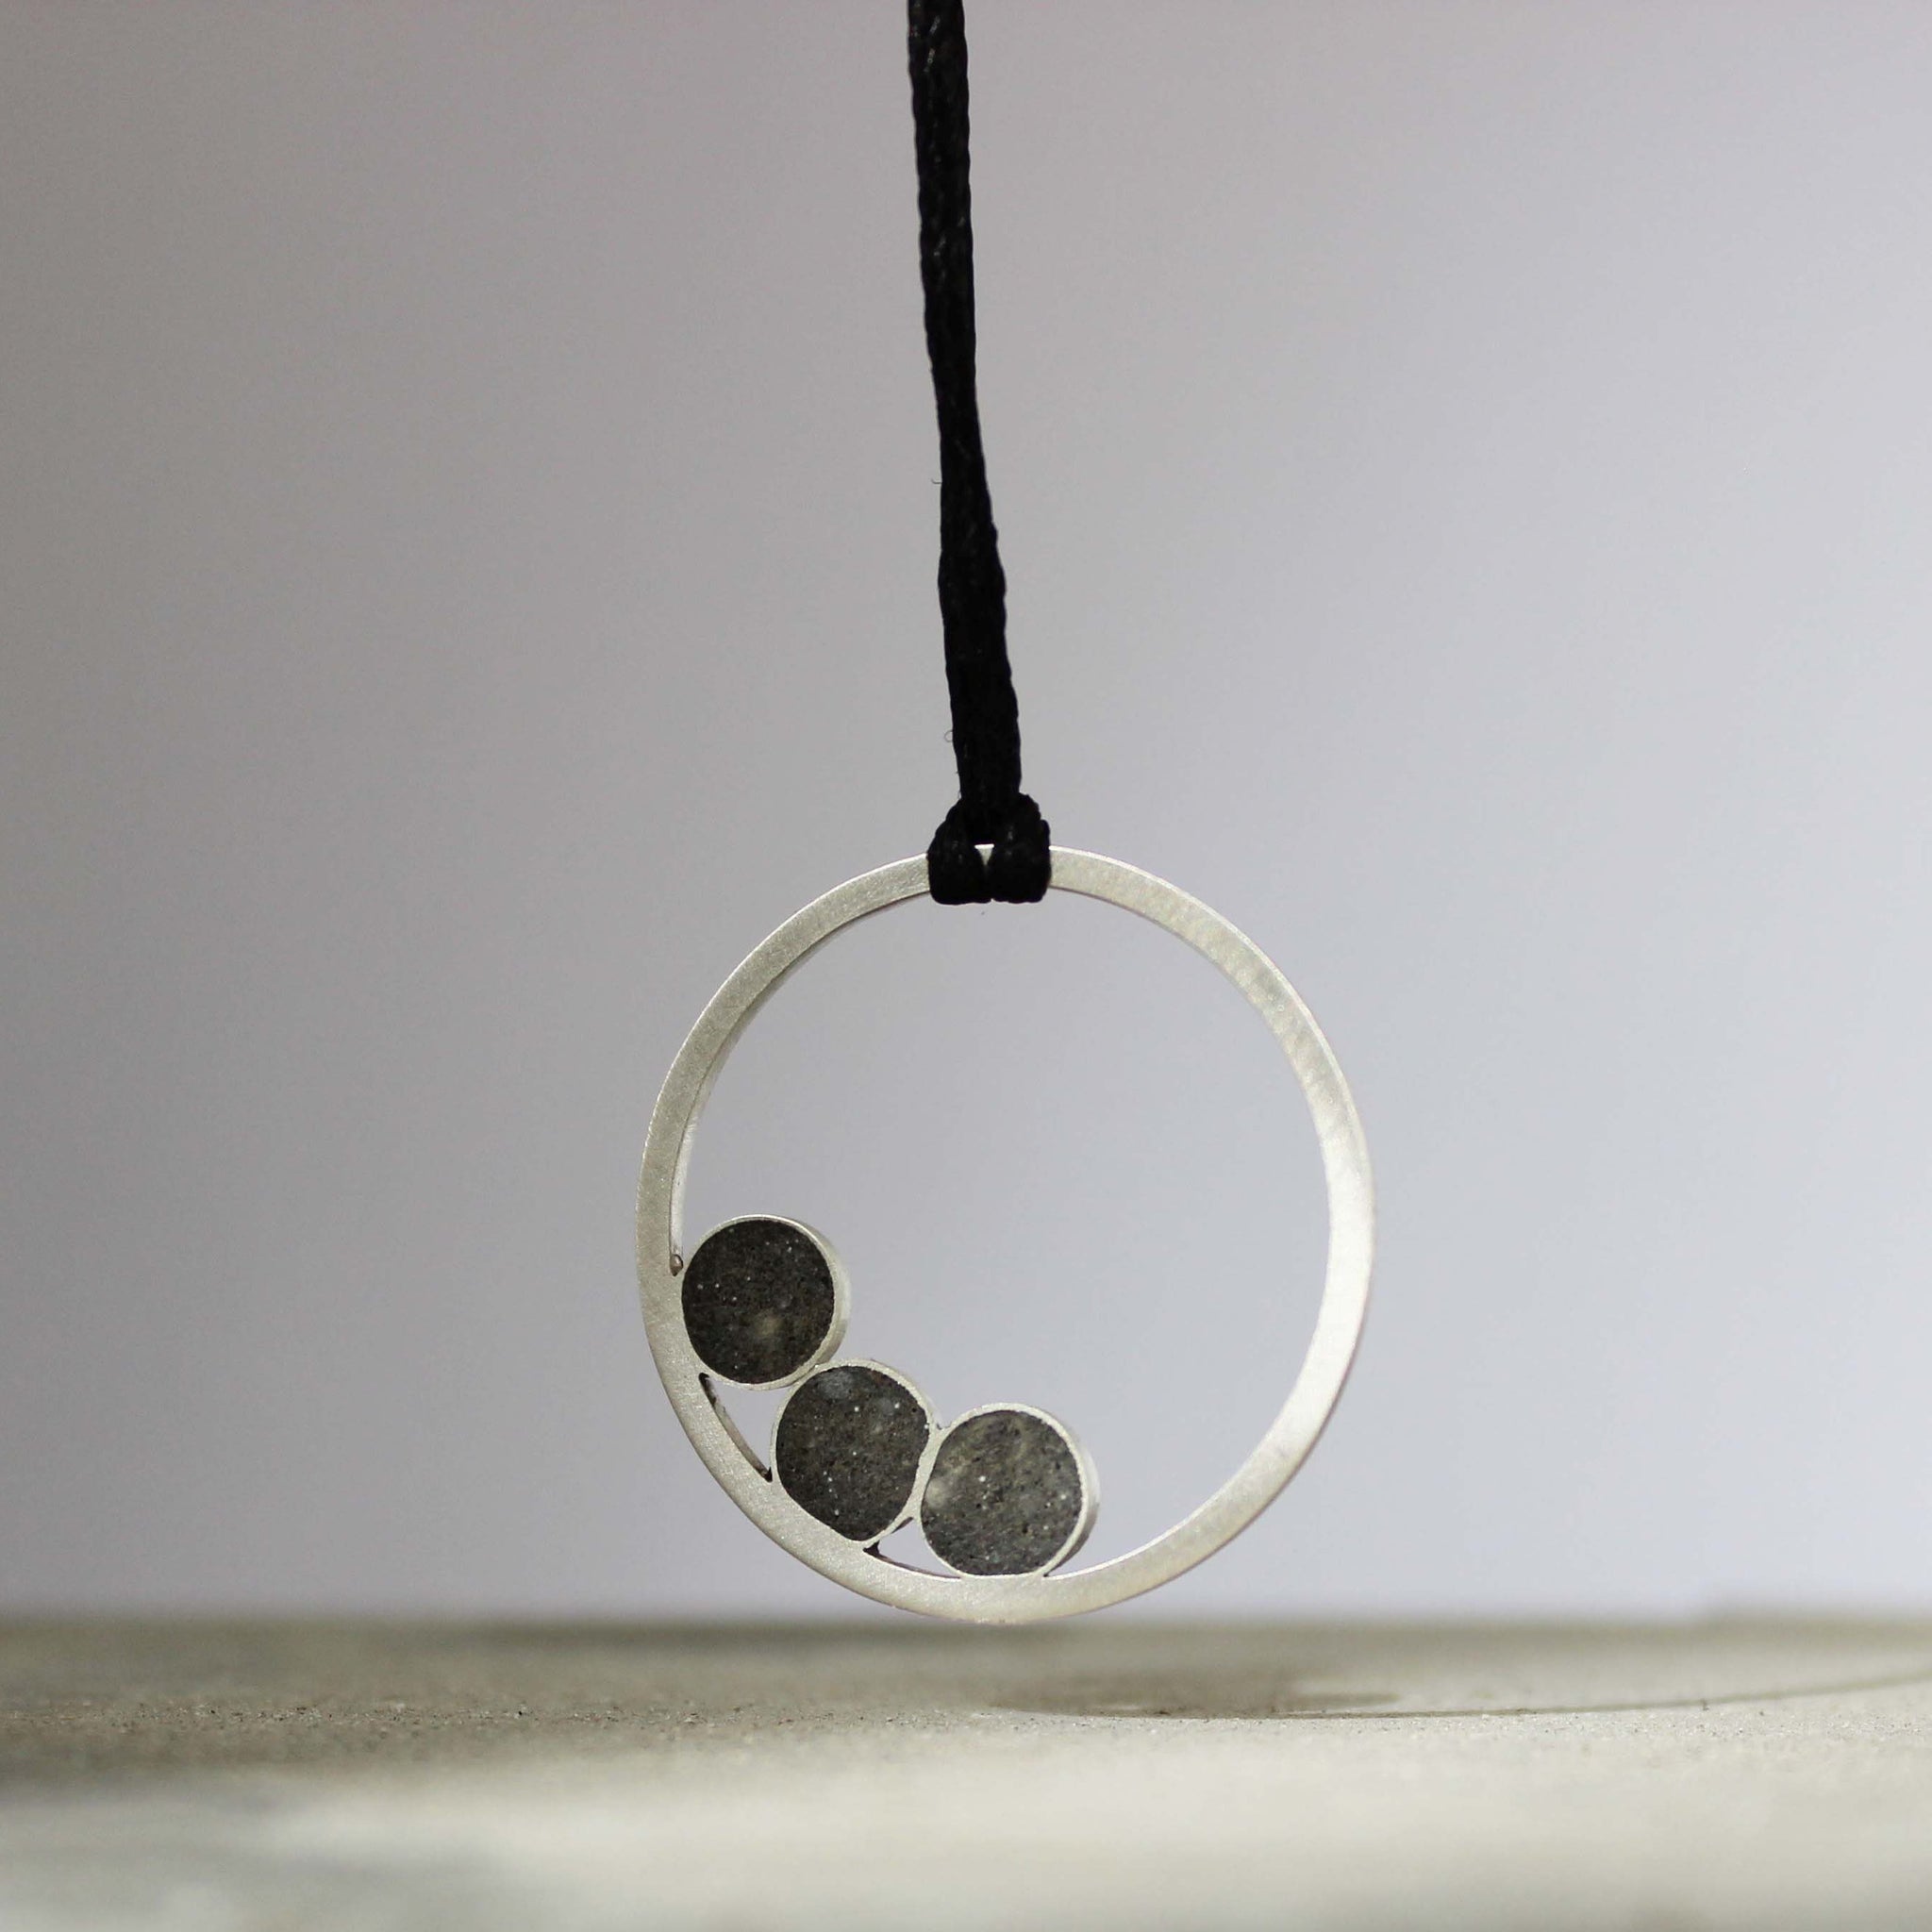 Leora Silver and Concrete Necklace, by BAARA Jewelry. Circular Pendant, Black Jewelry, Concrete Jewelry, Handmade Necklace